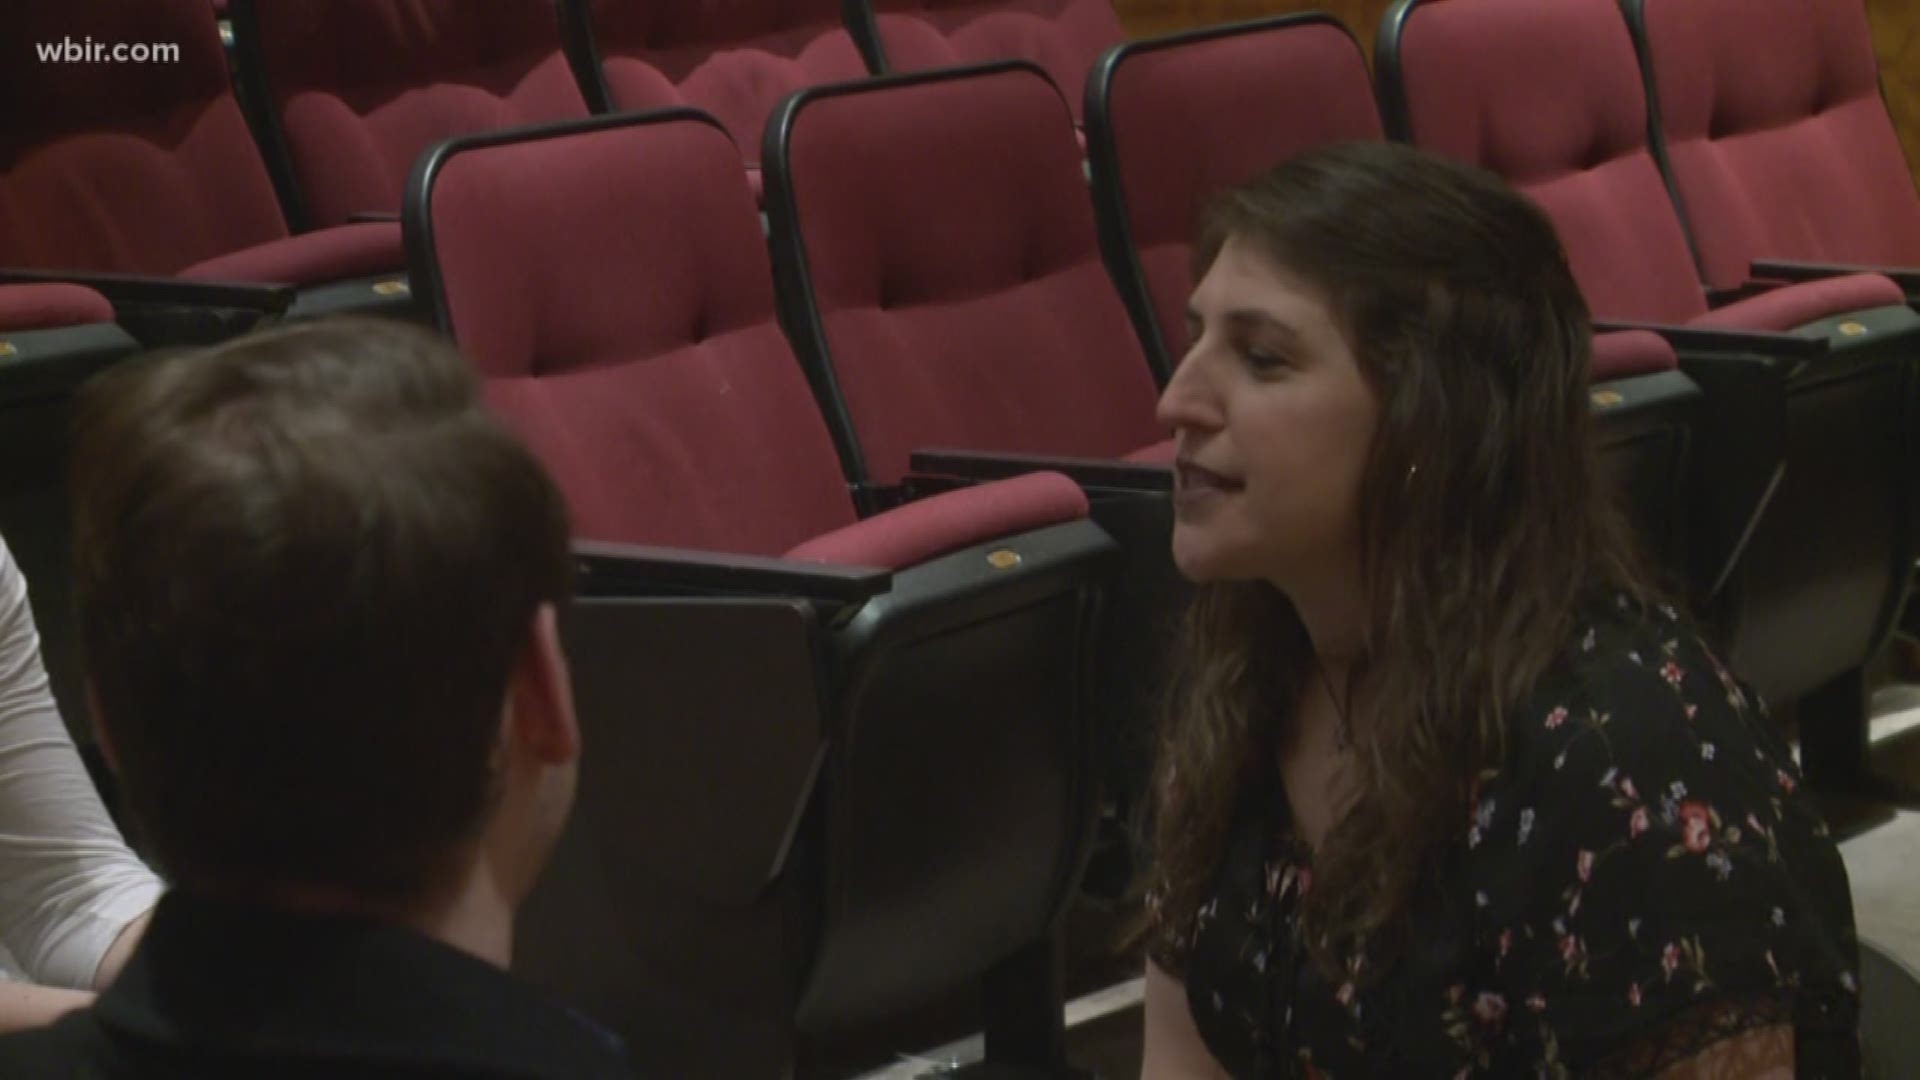 Big Bang Theory actress Mayim Bialik spoke with UT students Monday about her career in science.